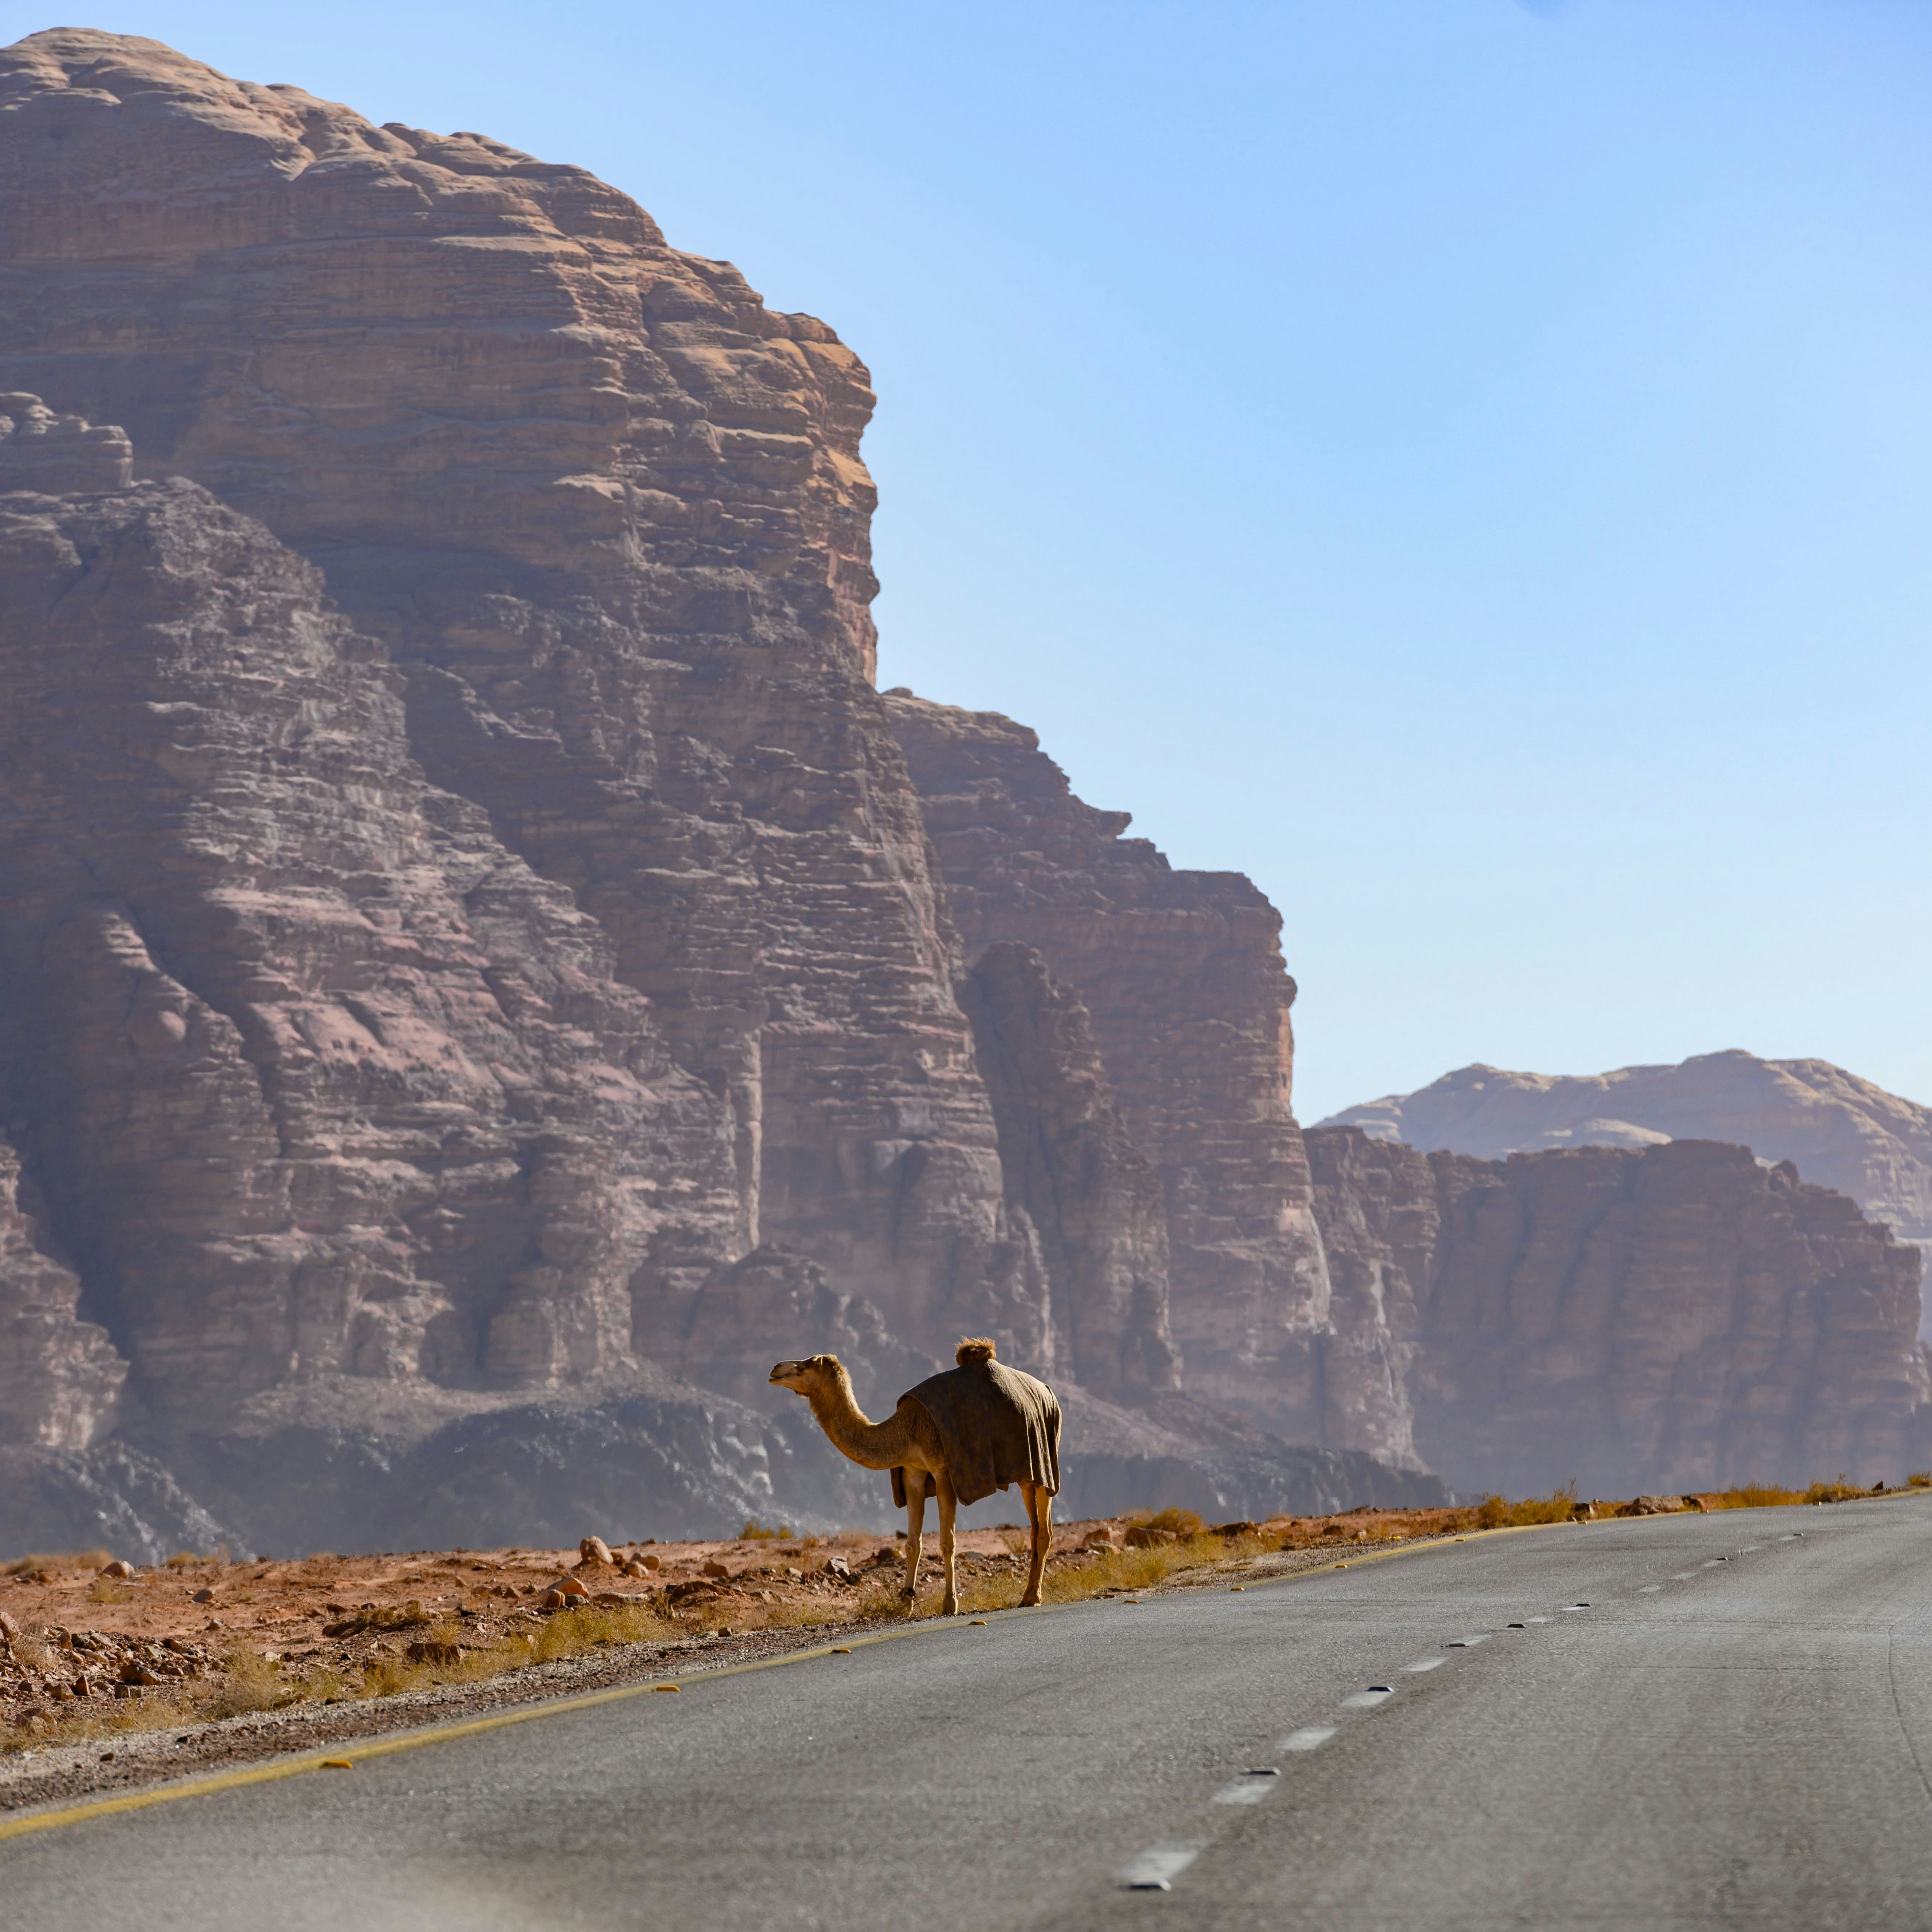 Kings highway, a camel is standing on a beautiful curvy road running through the Wadi Rum desert with rocky mountains in the distance, Jordan